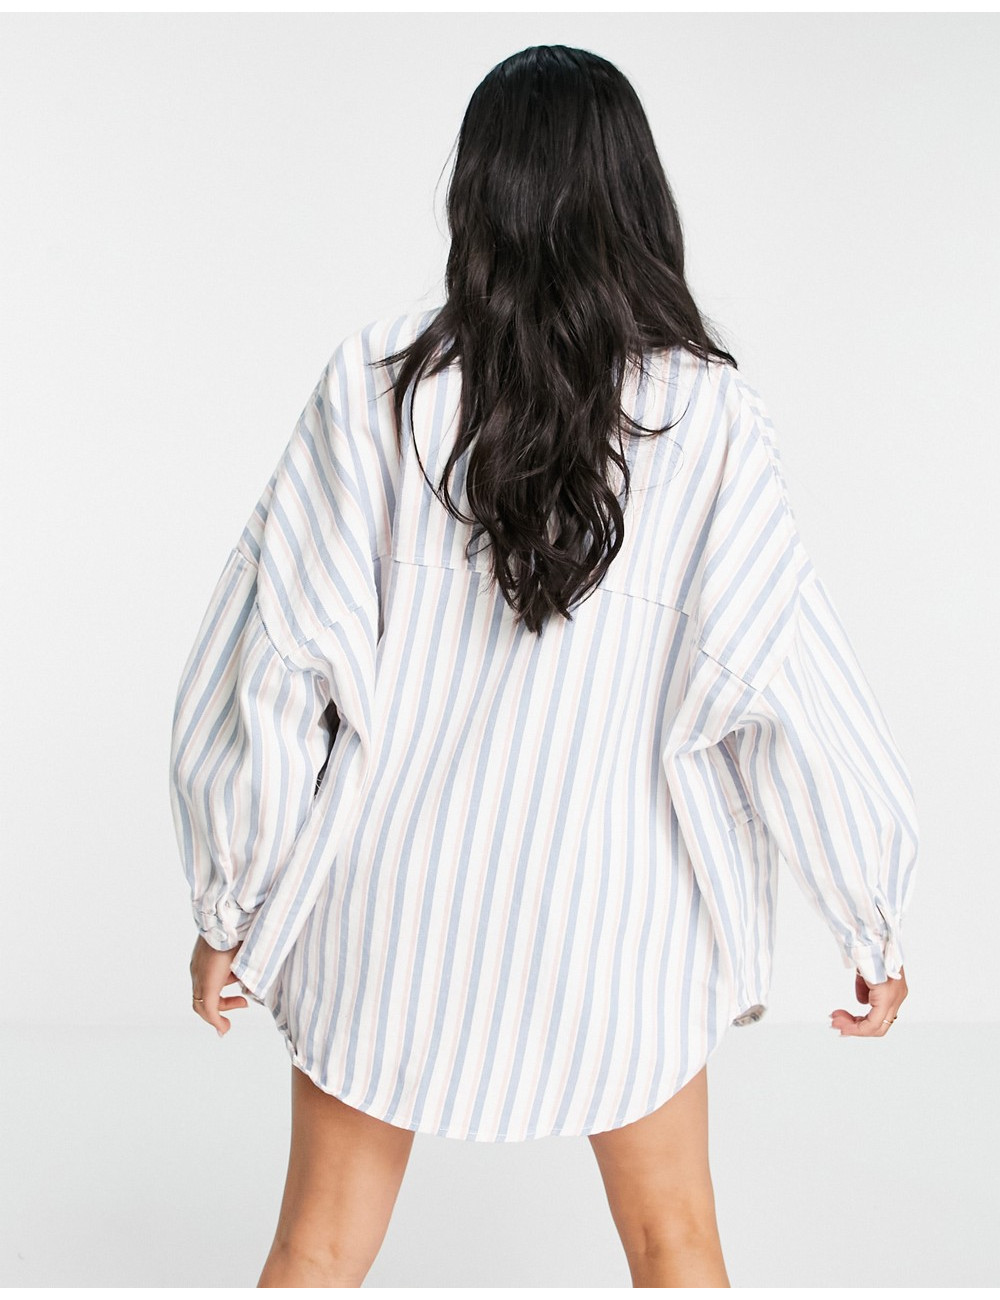 Missguided co-ord oversized...